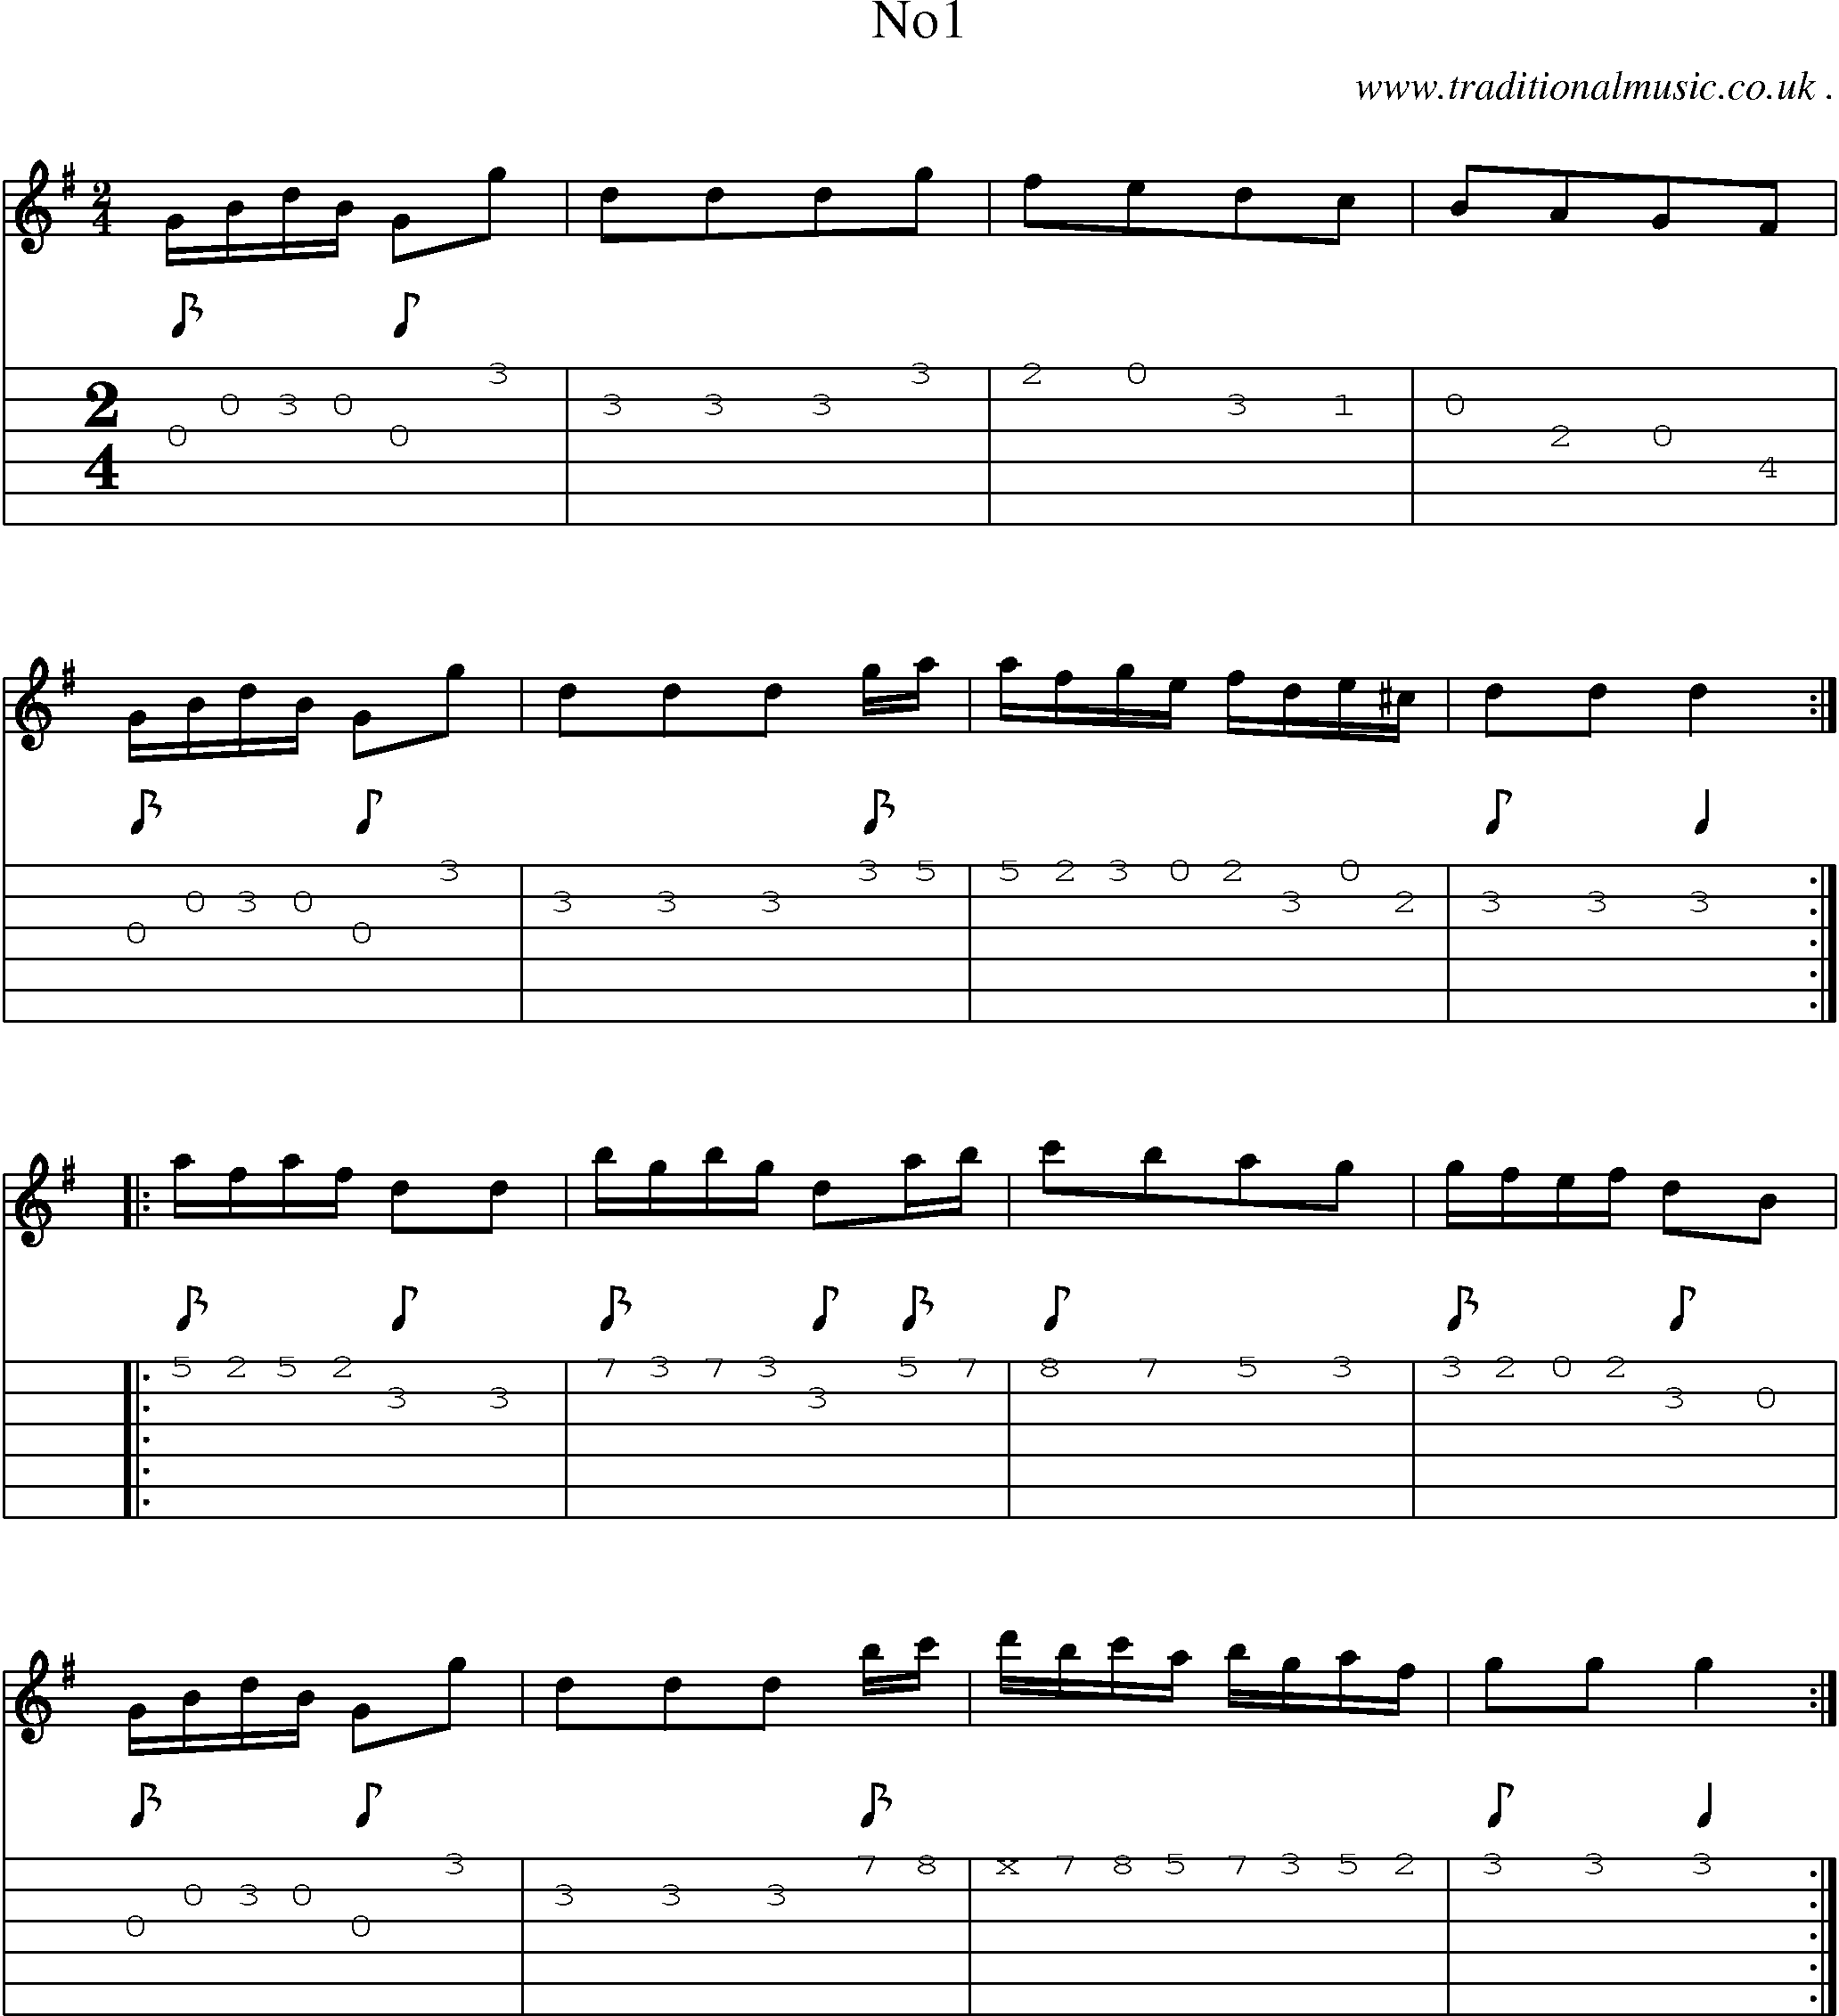 Sheet-Music and Guitar Tabs for No1